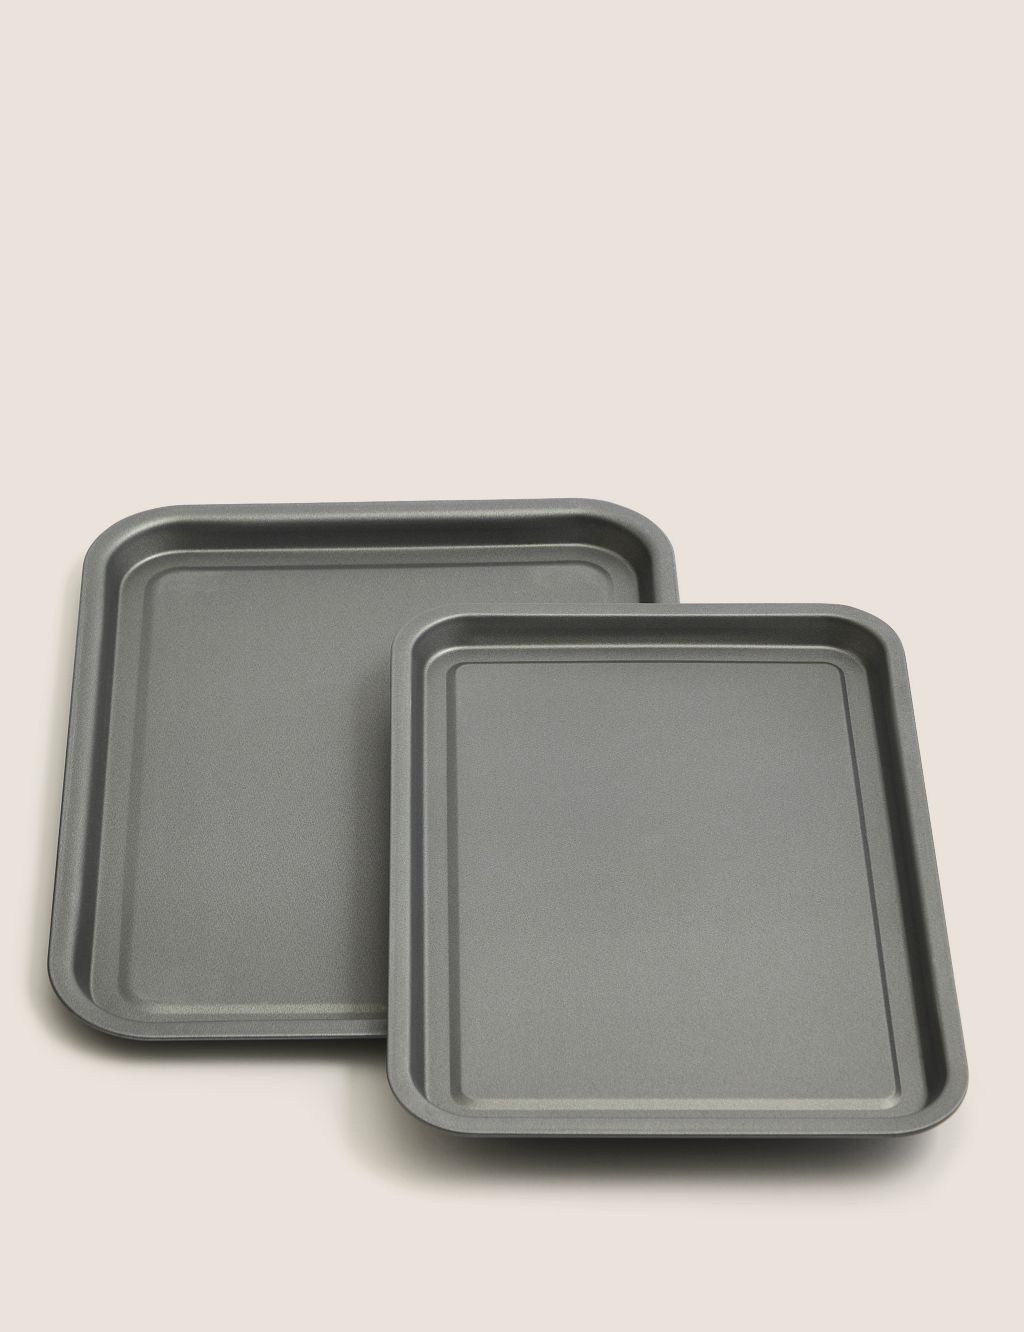 Set of 2 Oven Trays image 1